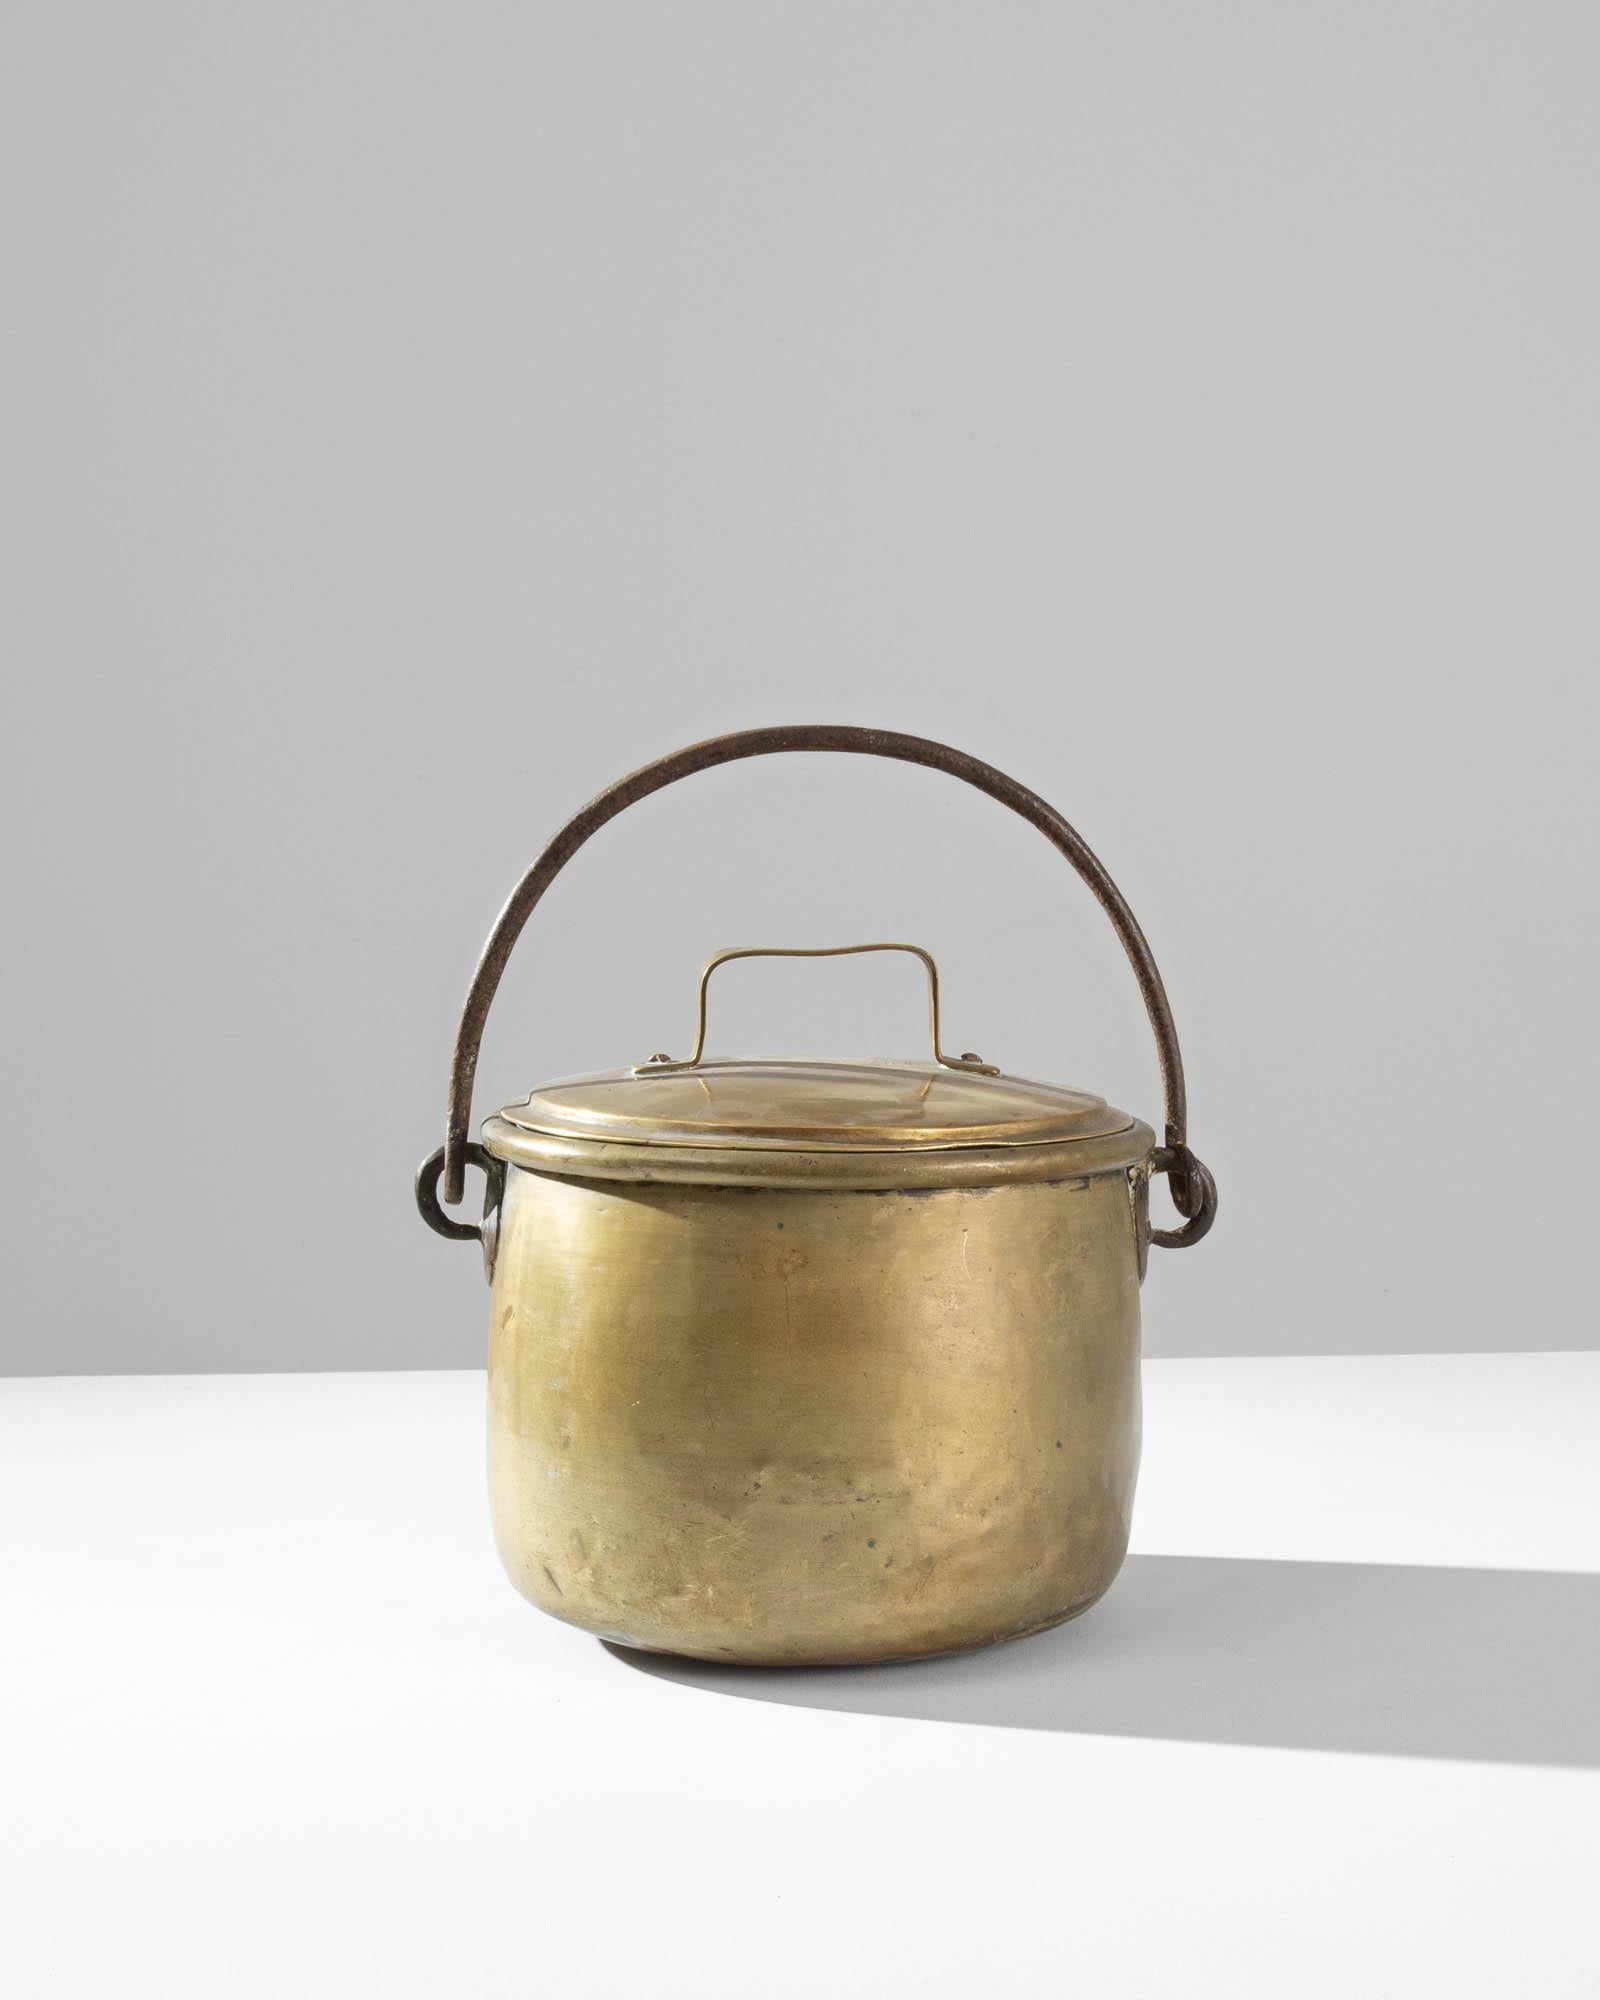 A brass pot from 19th century France. Totally handmade, this pot features a beautiful oxidized patina layering the original polished finish. These artisanally crafted pots were made with care and detail, along with high quality materials produced